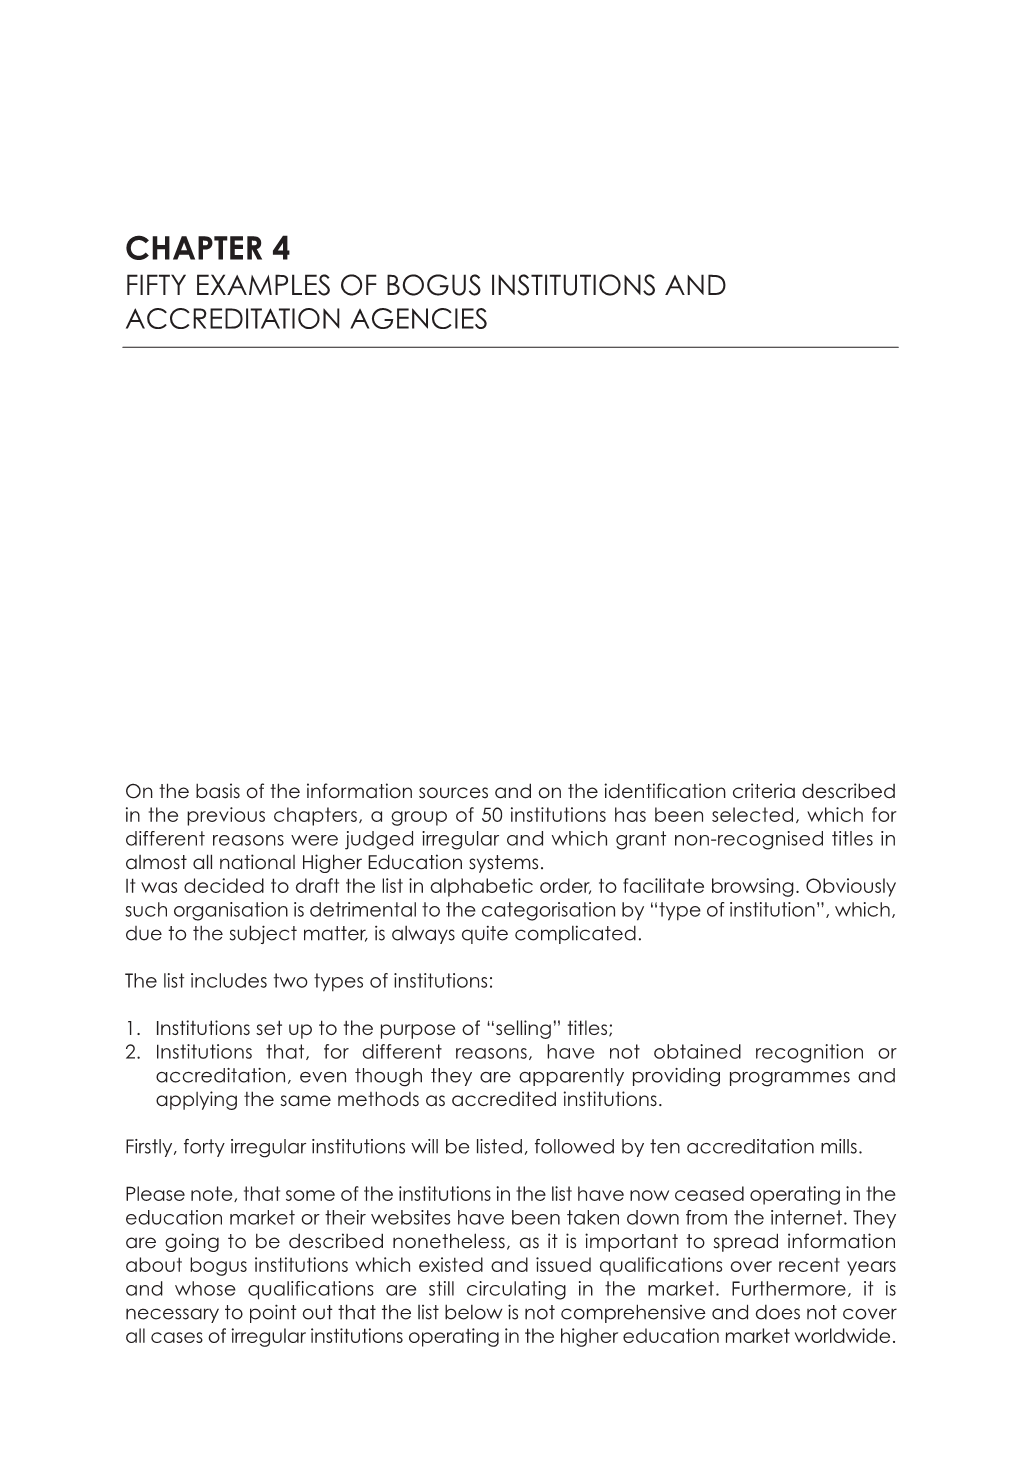 Chapter 4 Fifty Examples of Bogus Institutions and Accreditation Agencies